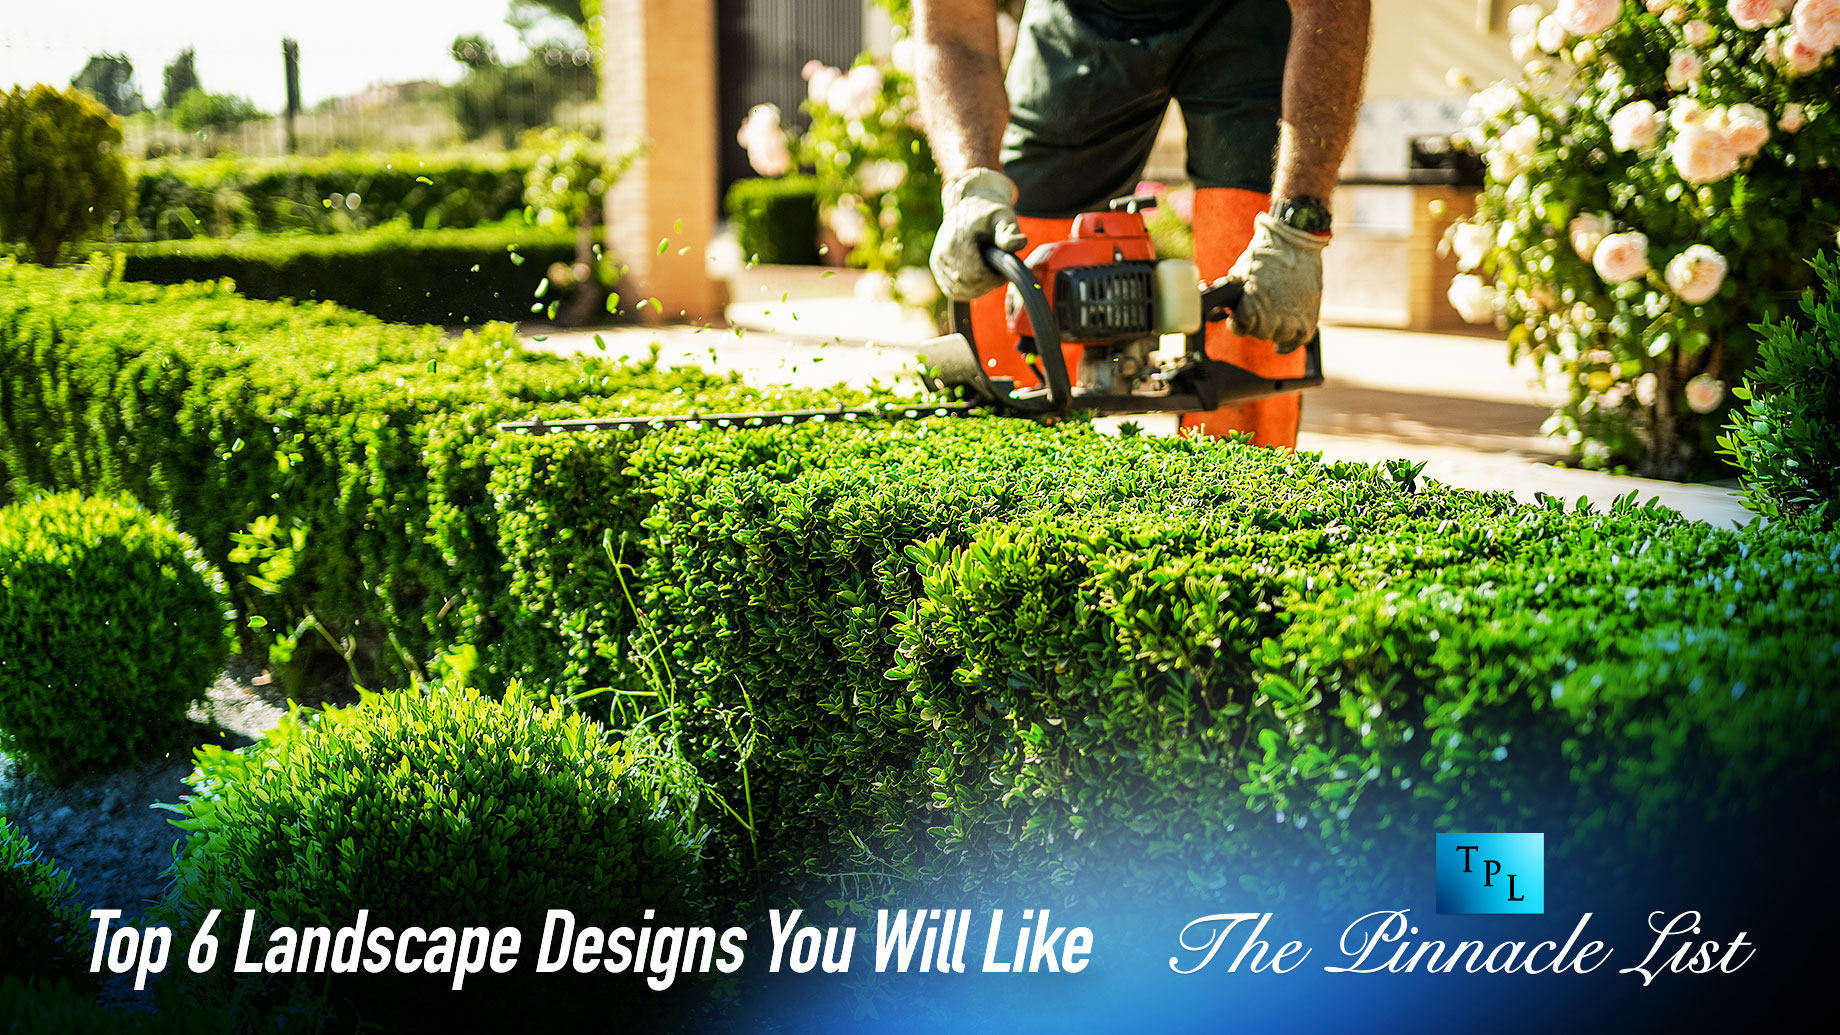 Top 6 Landscape Designs You Will Like